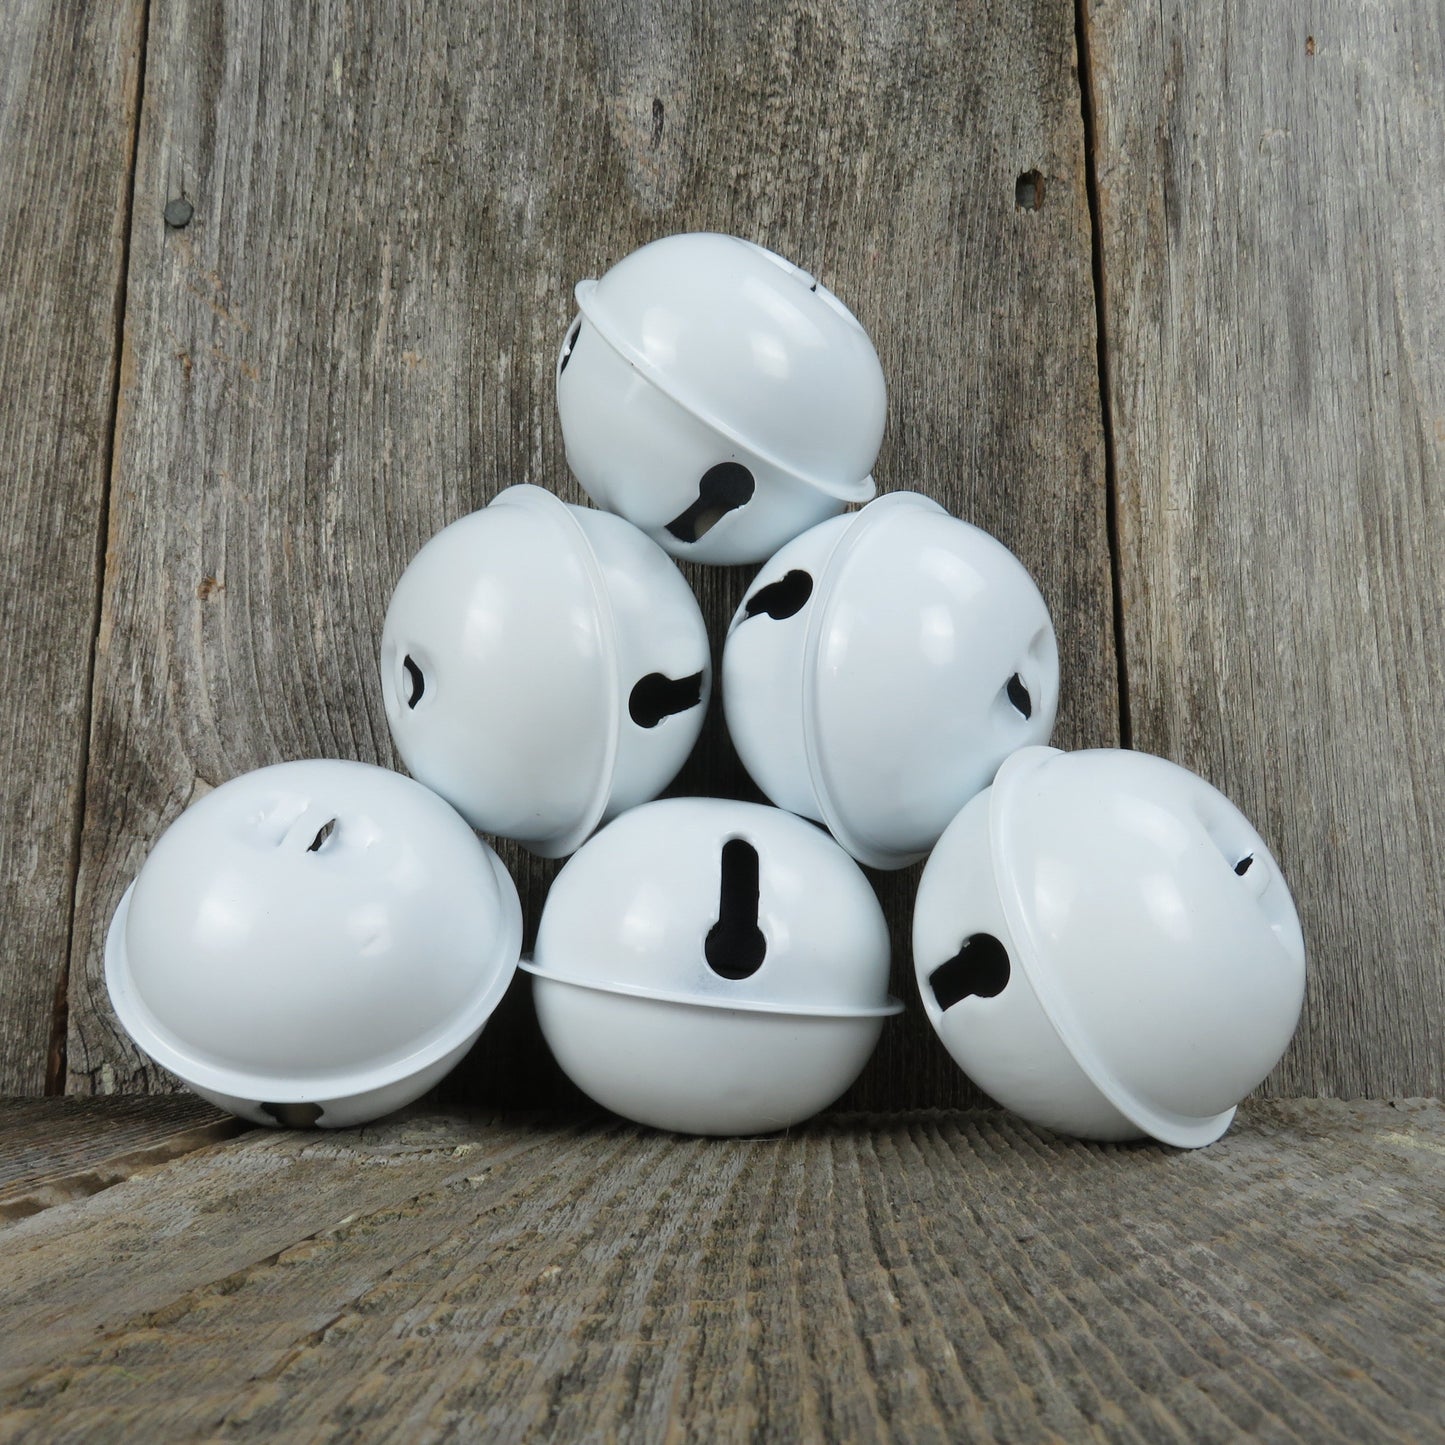 Sleigh Jingle Bells White Enameled Painted Round Christmas Craft Bells Set of 6 Extra Large 3.25 inches Craft Decor DIY Embellishment